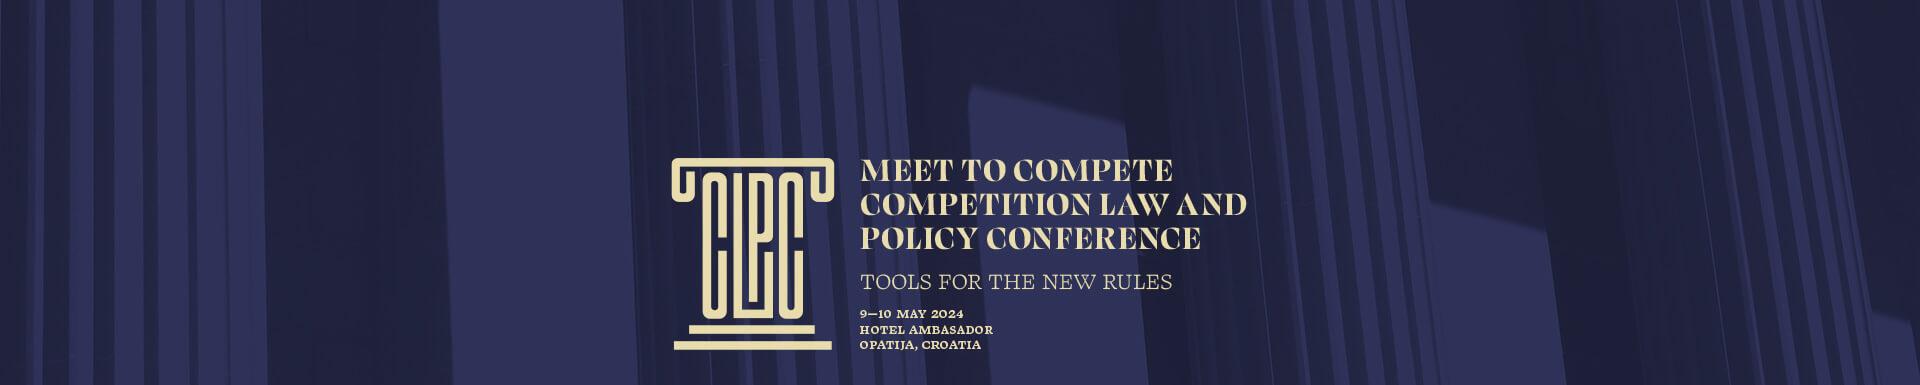  NAJAVA KONFERECIJE   MEET TO COMPETE  COMPETITION LAW AND POLICY CONFERENCE   “TOOLS FOR THE NEW RULES“